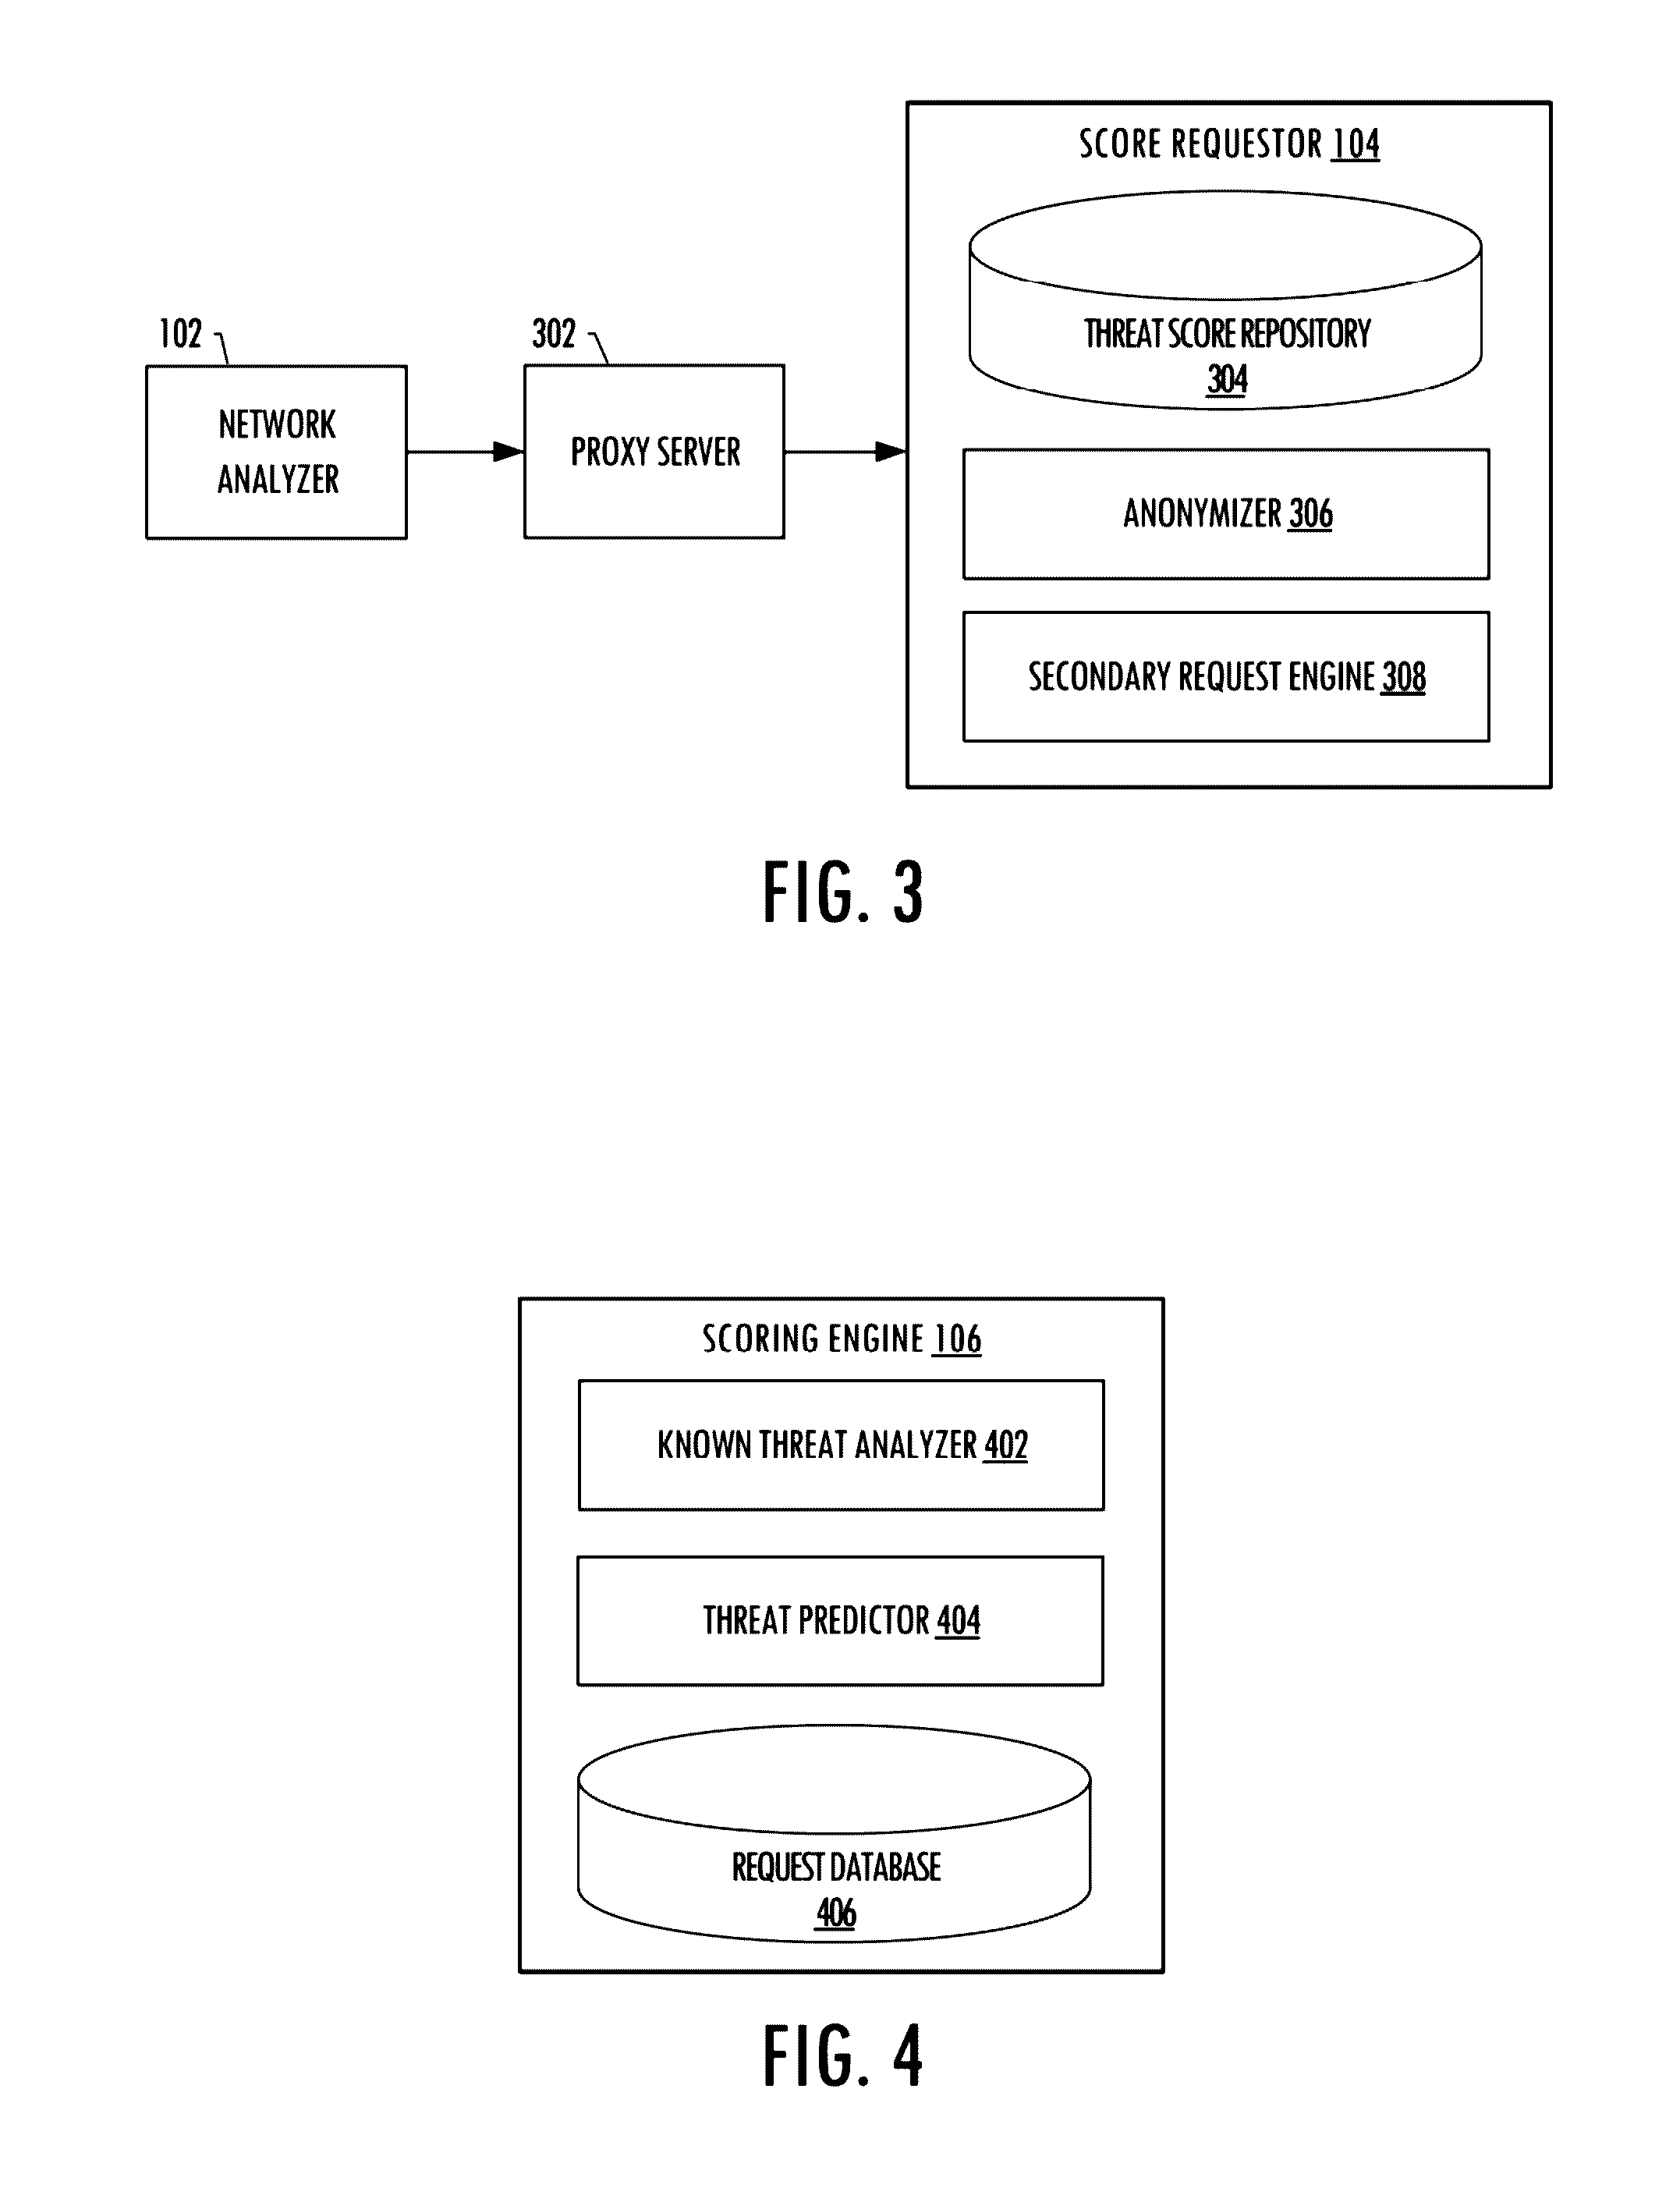 System for anonymously detecting and blocking threats within a telecommunications network